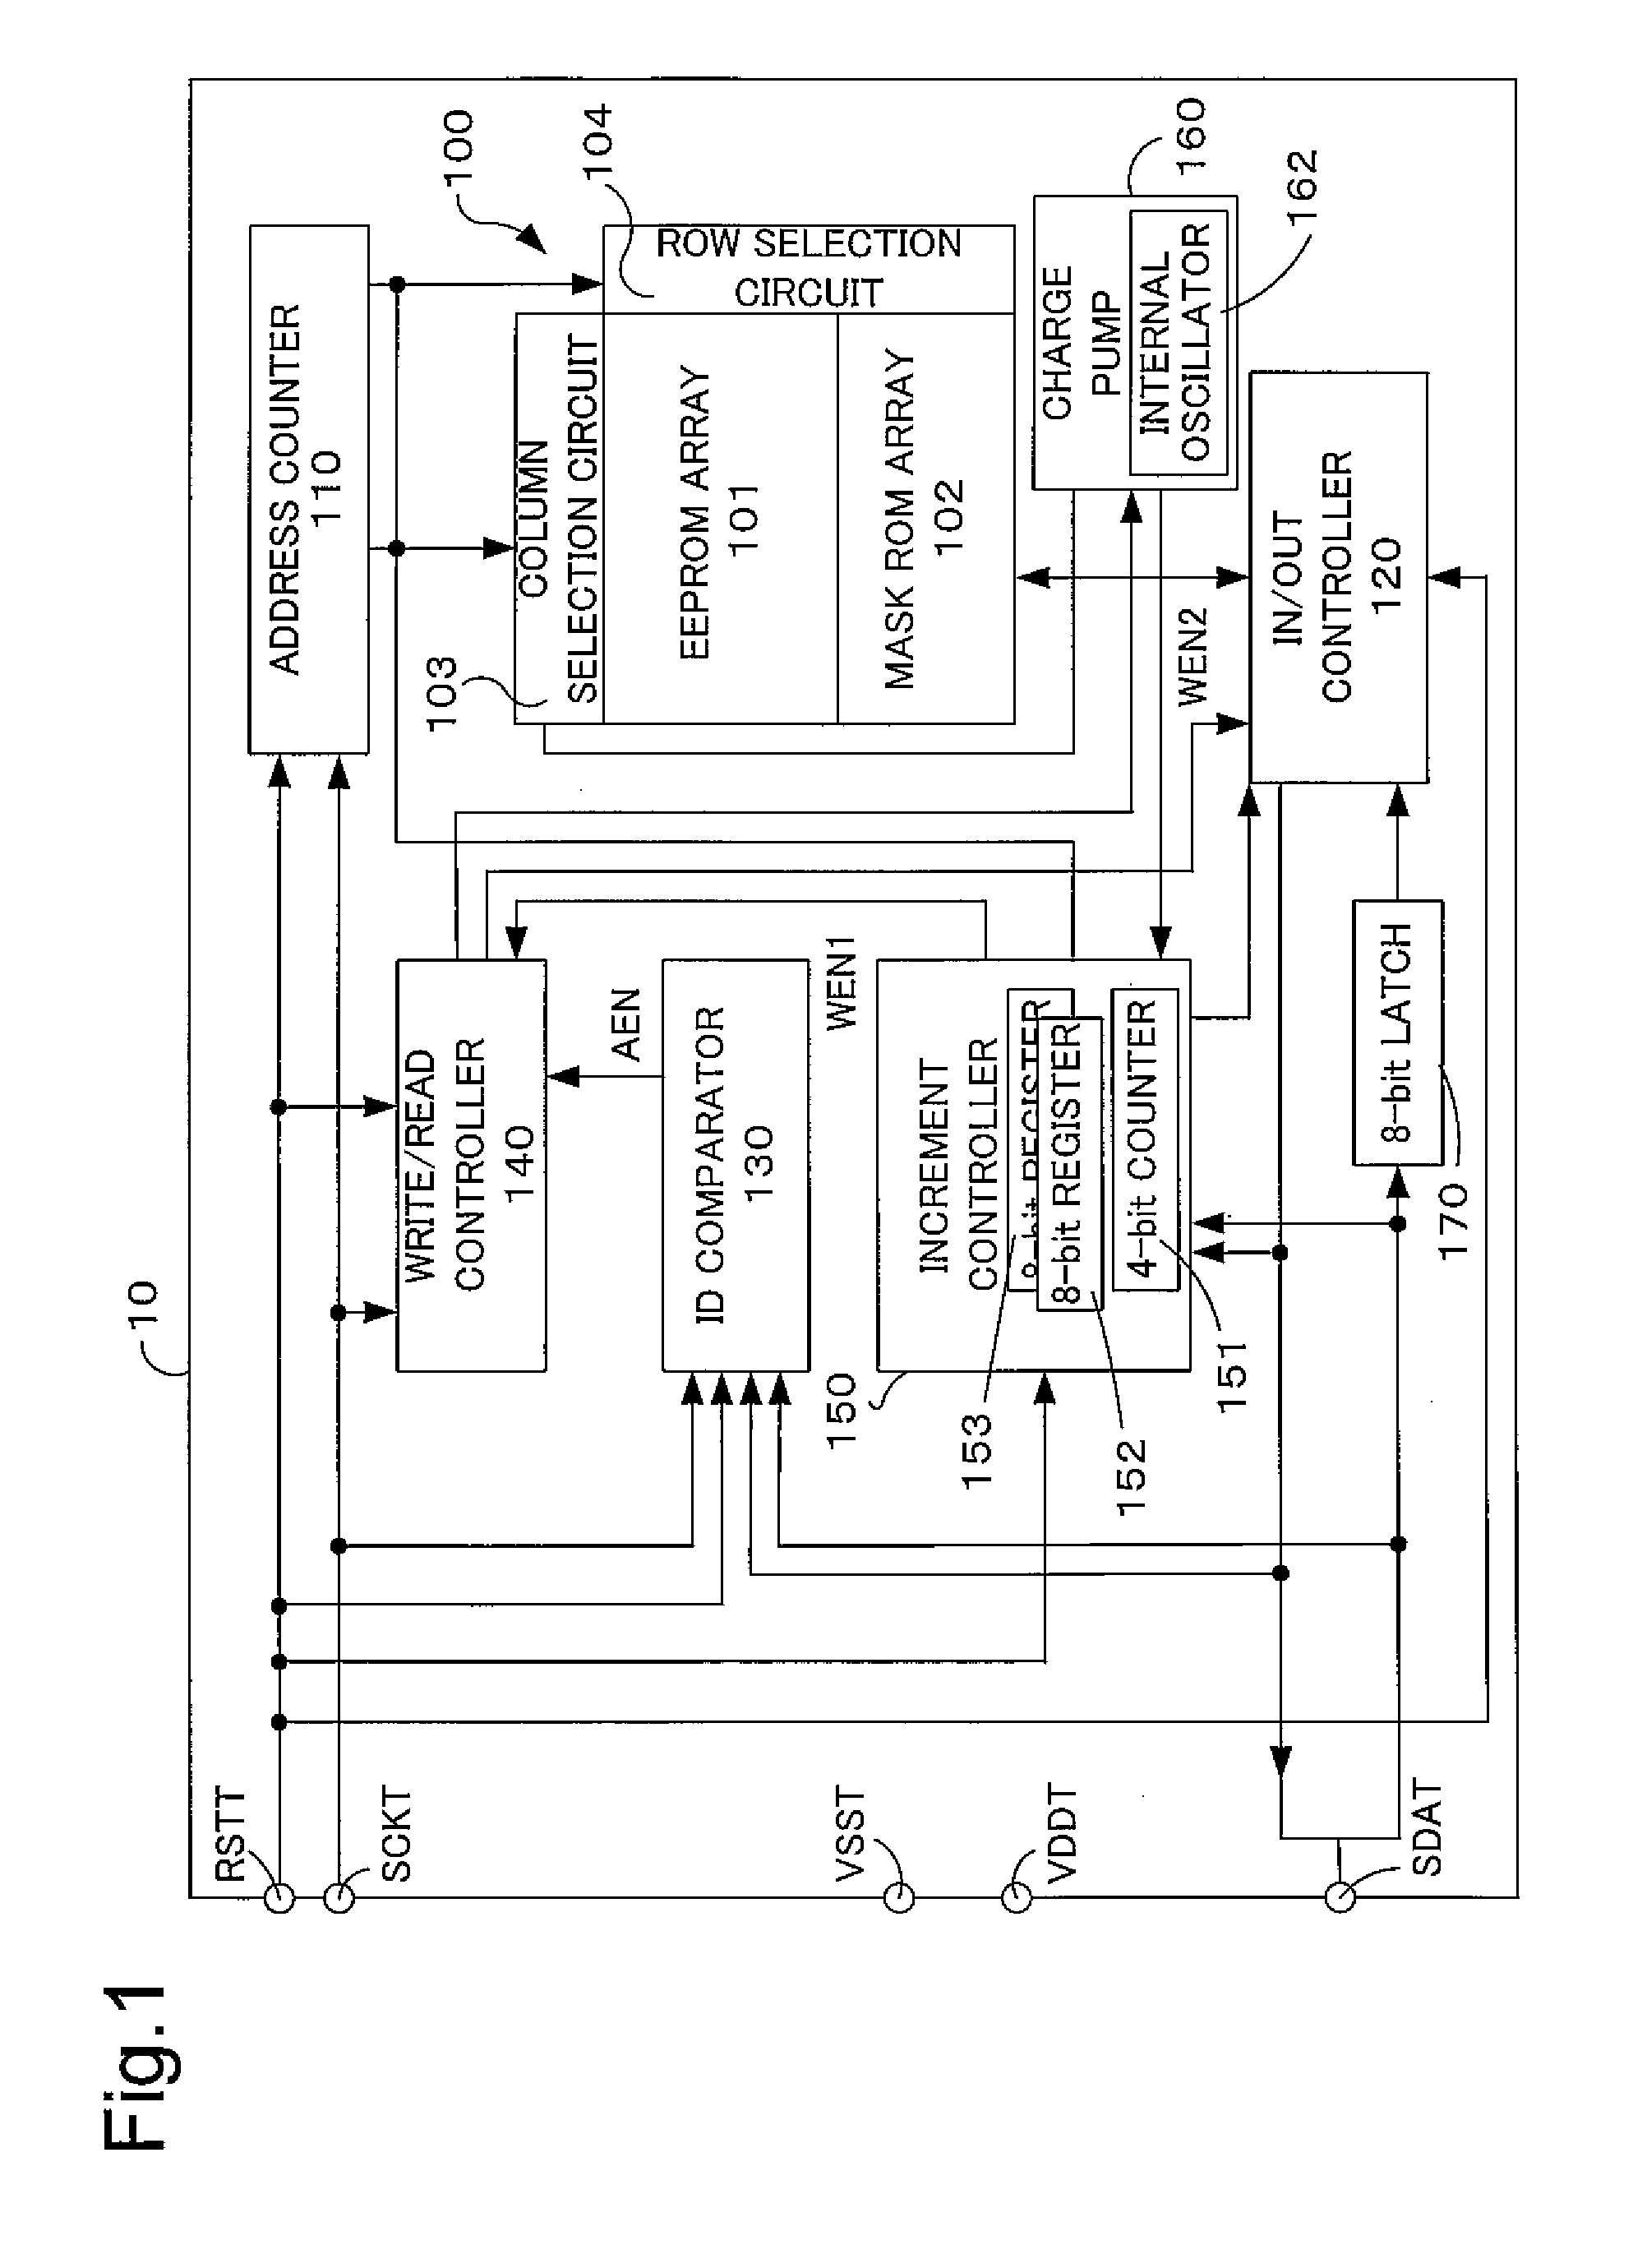 Sequential access memory